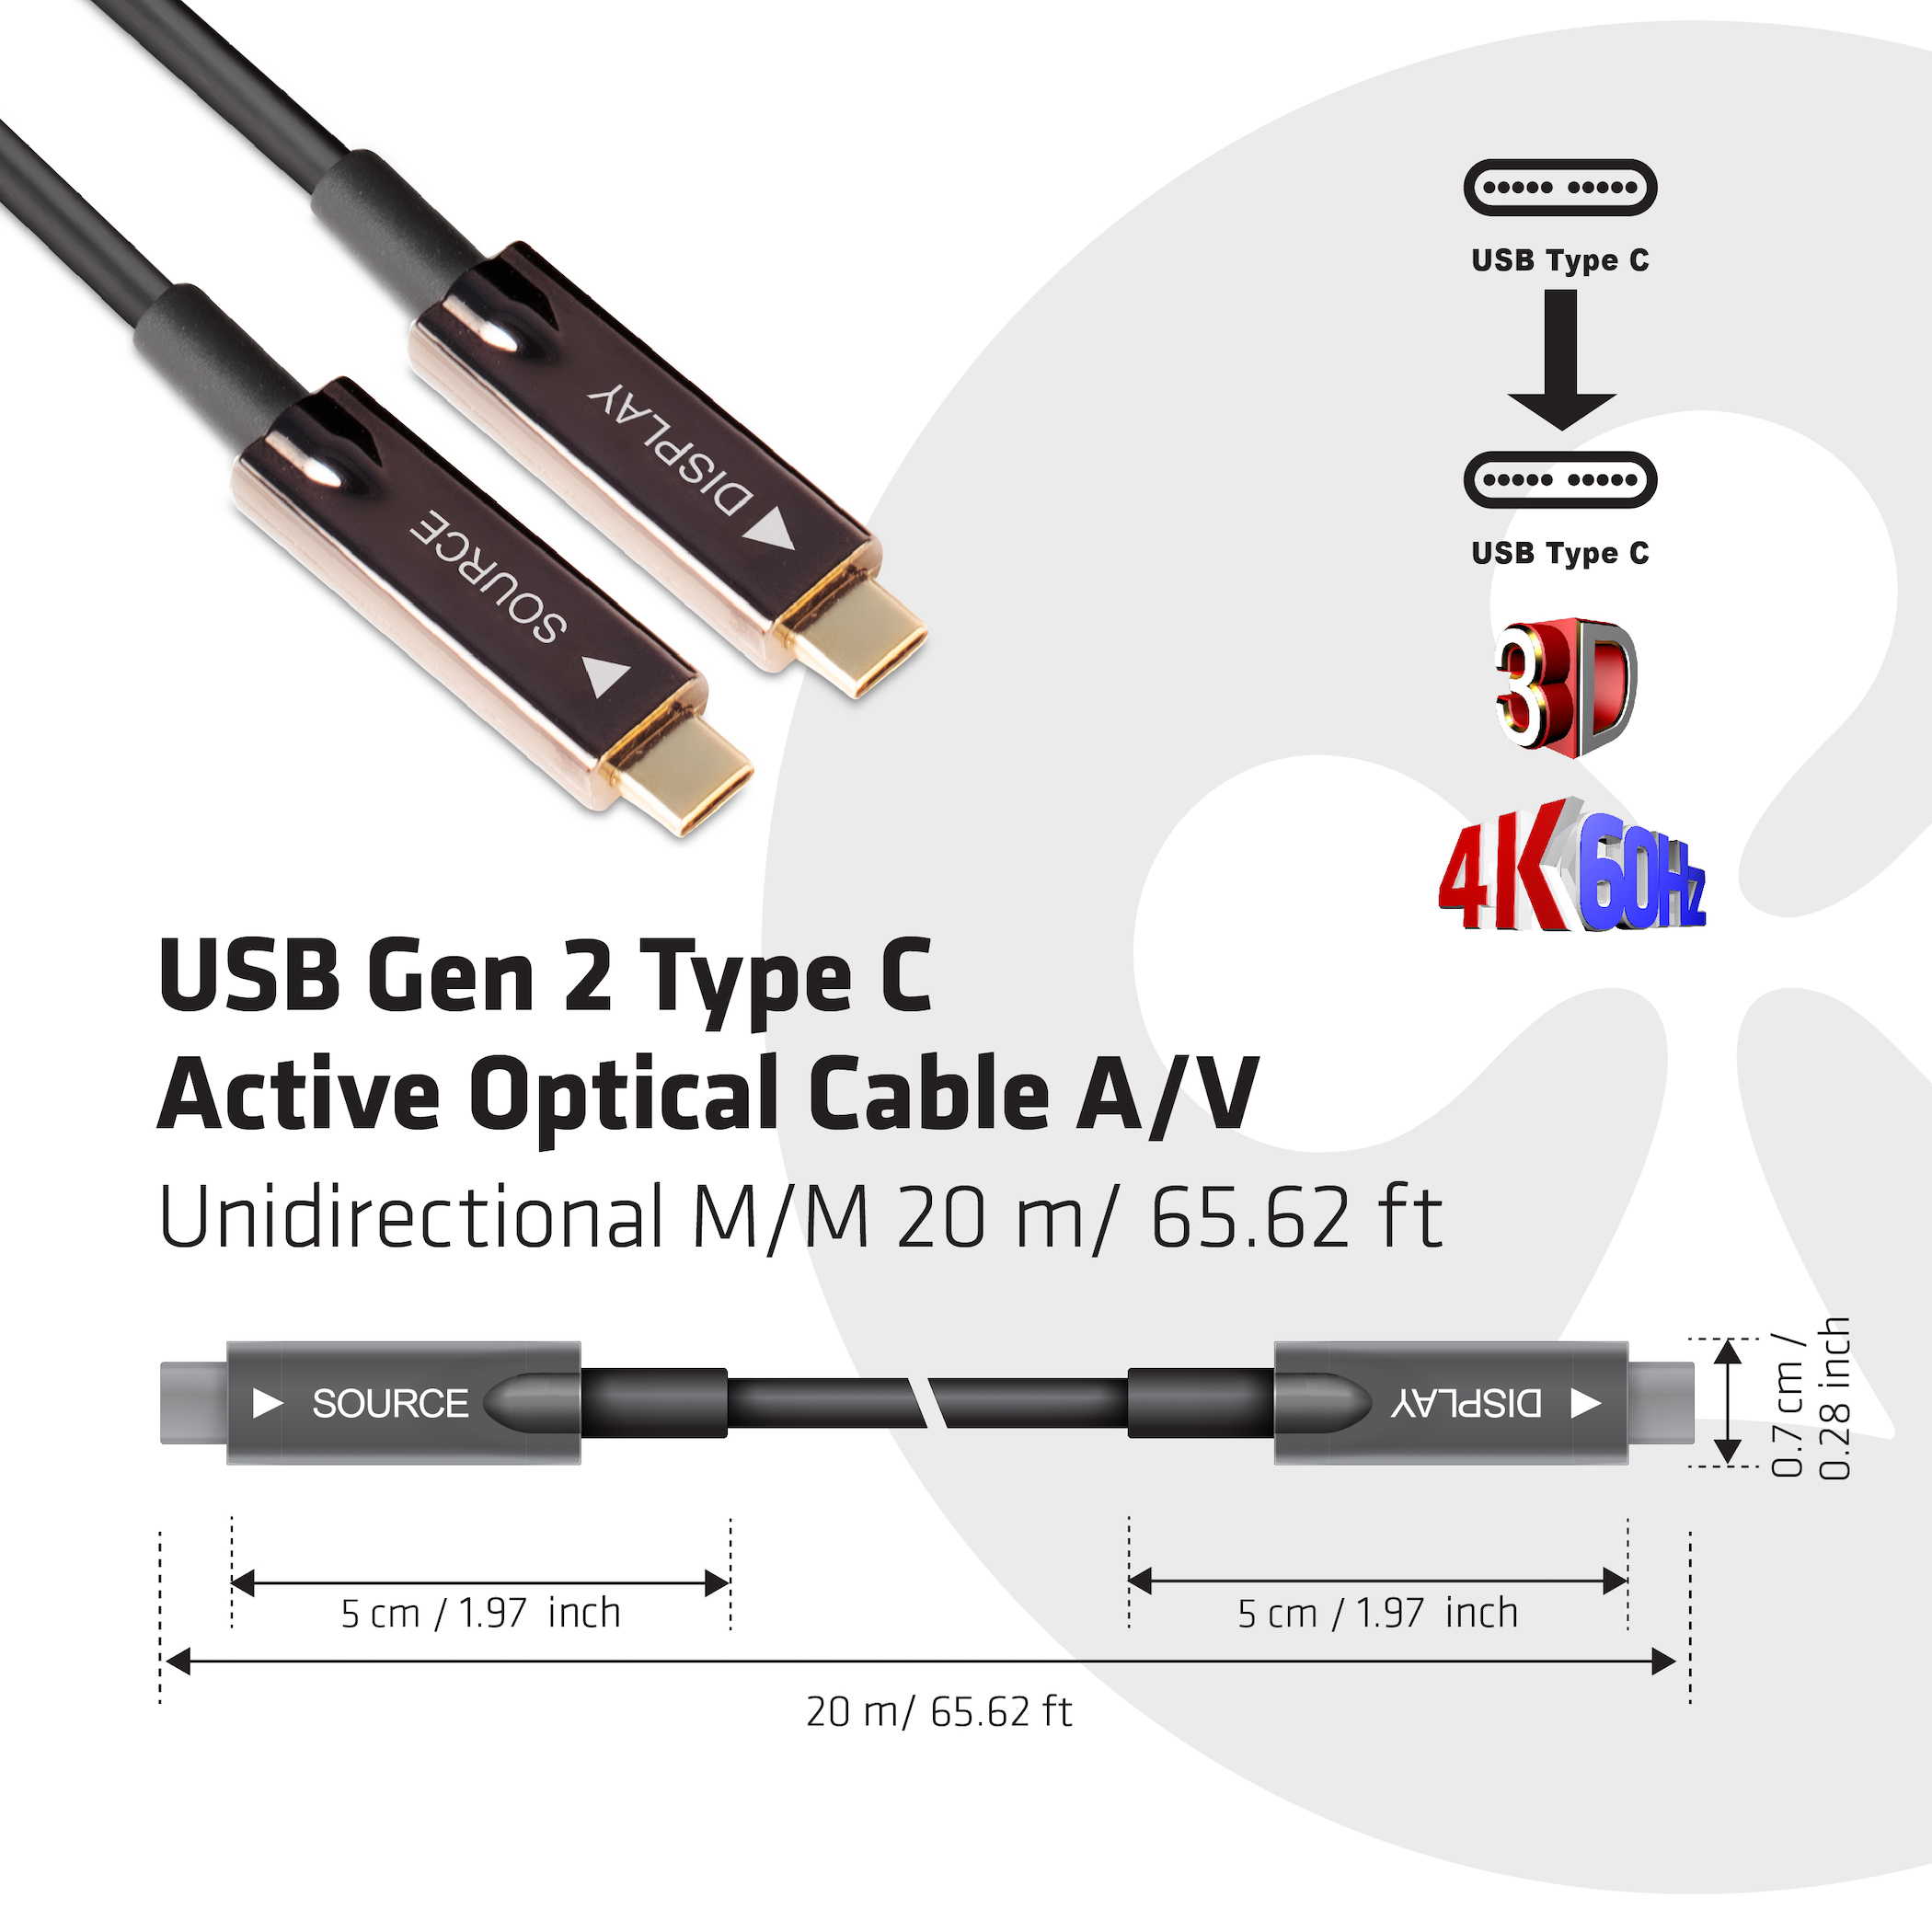 USB 3.2 GEN 2 TYPE-C ACTIVE OPTICAL A/VUNIDIRECTIONAL CABLE MALE/MALE 20 M/ 65.62 FT